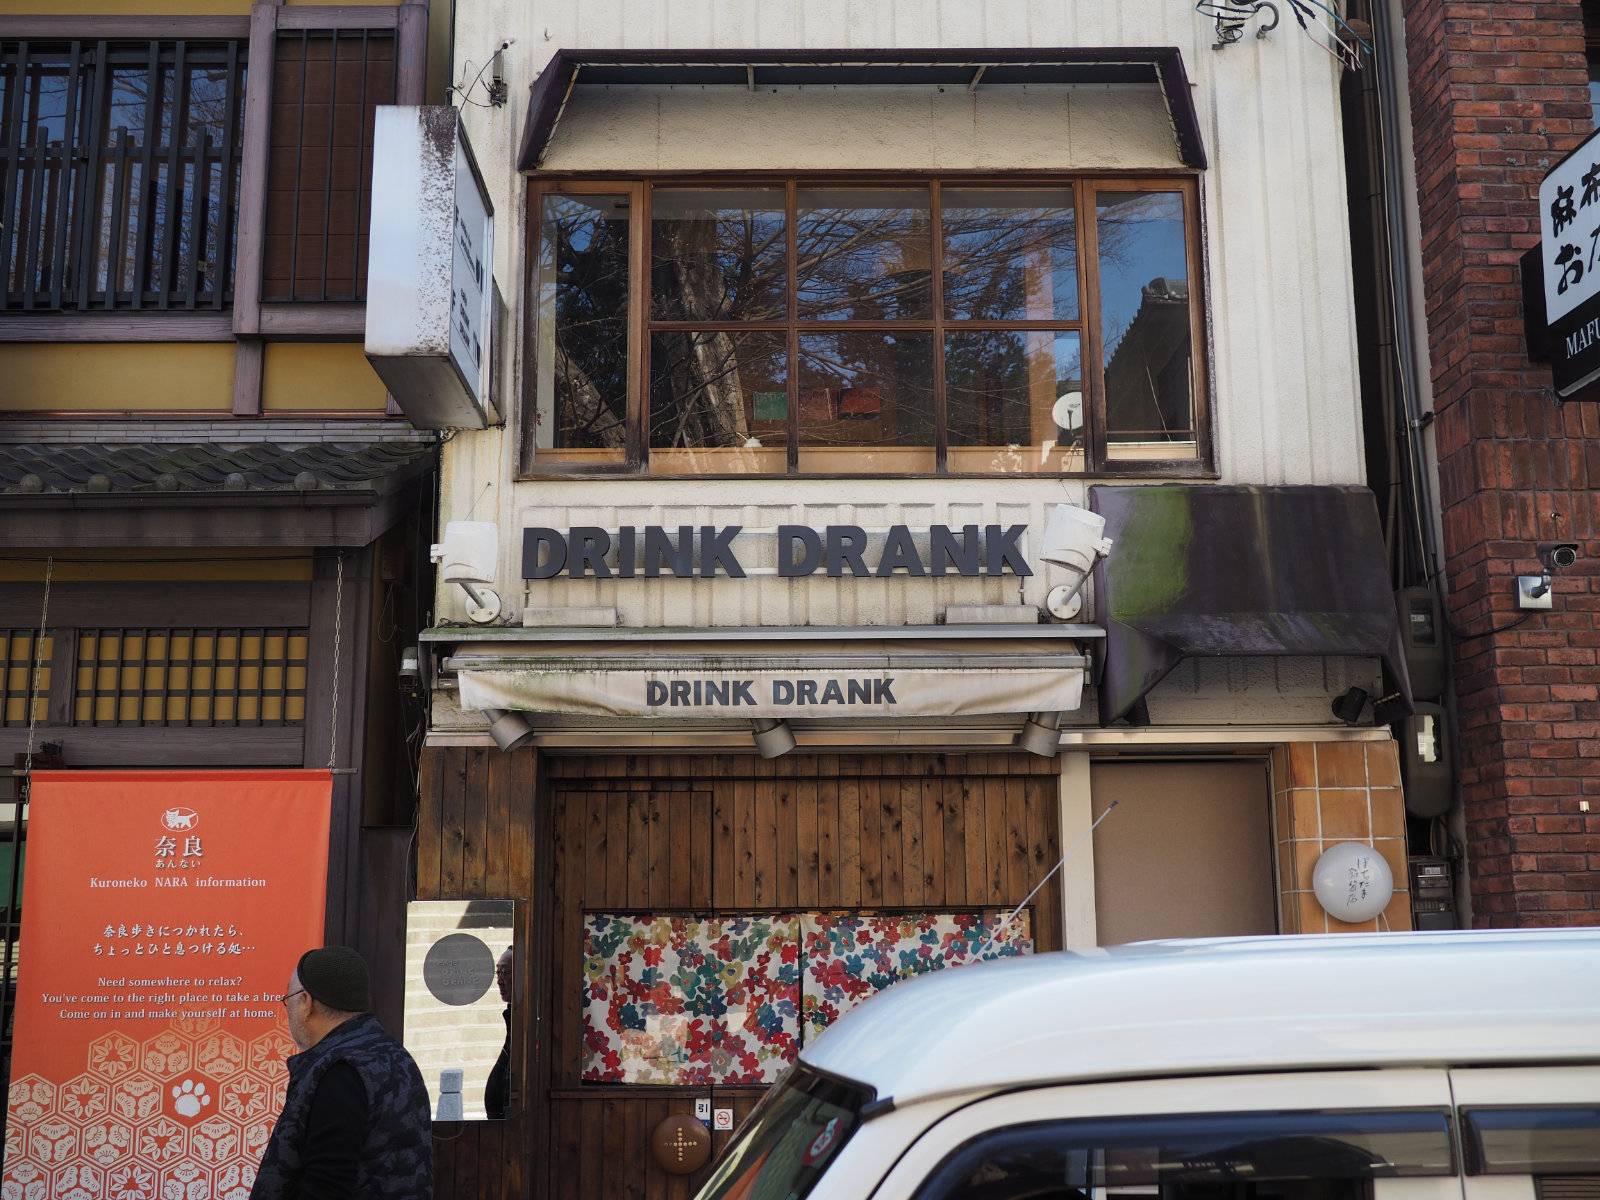 A building called Drink Drank